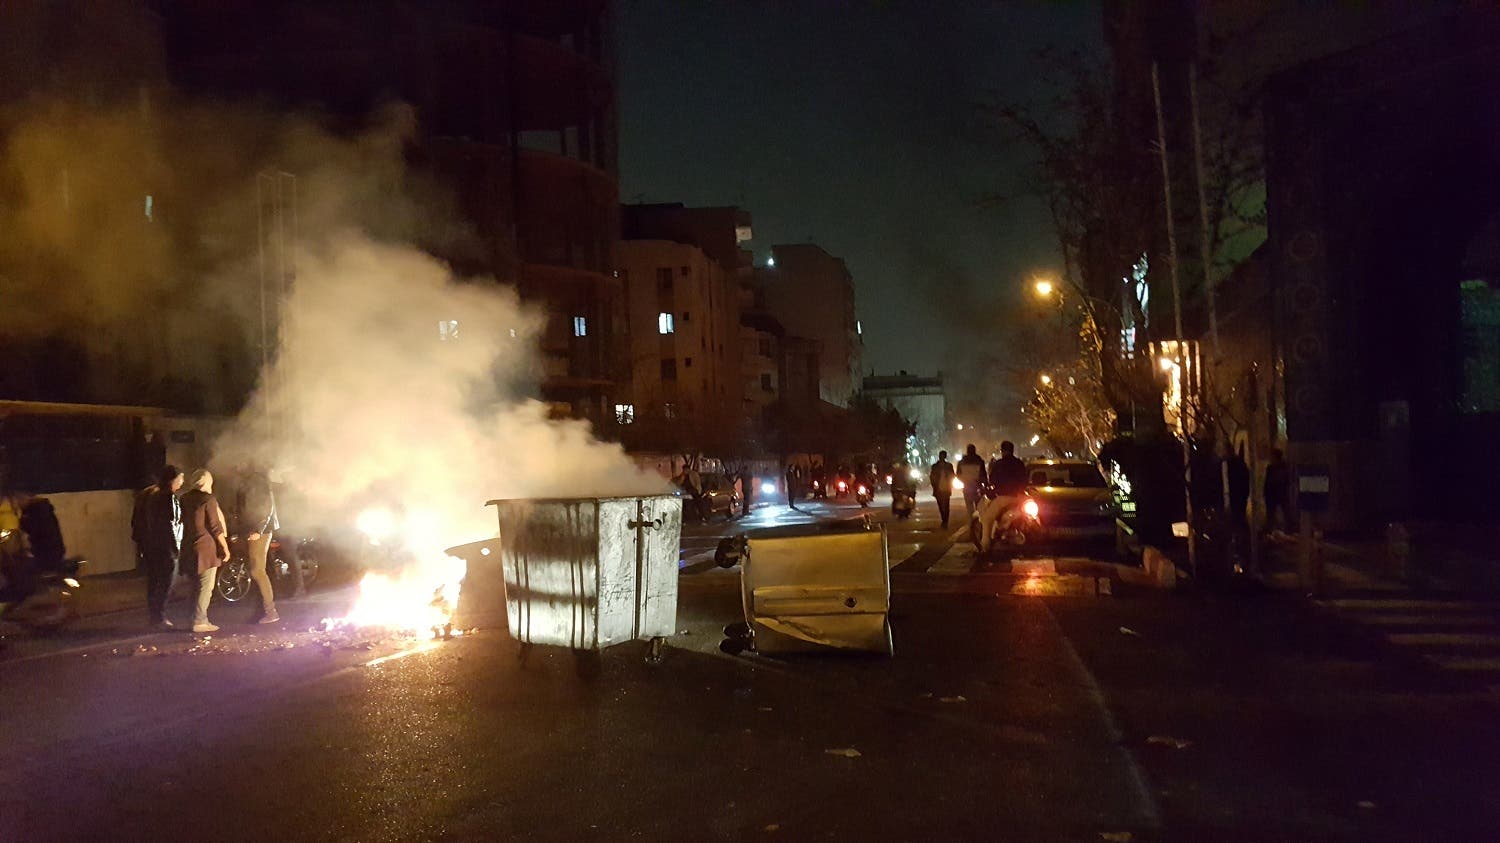 People protest in Tehran, Iran December 30, 2017 in in this picture obtained from social media. (Reuters)